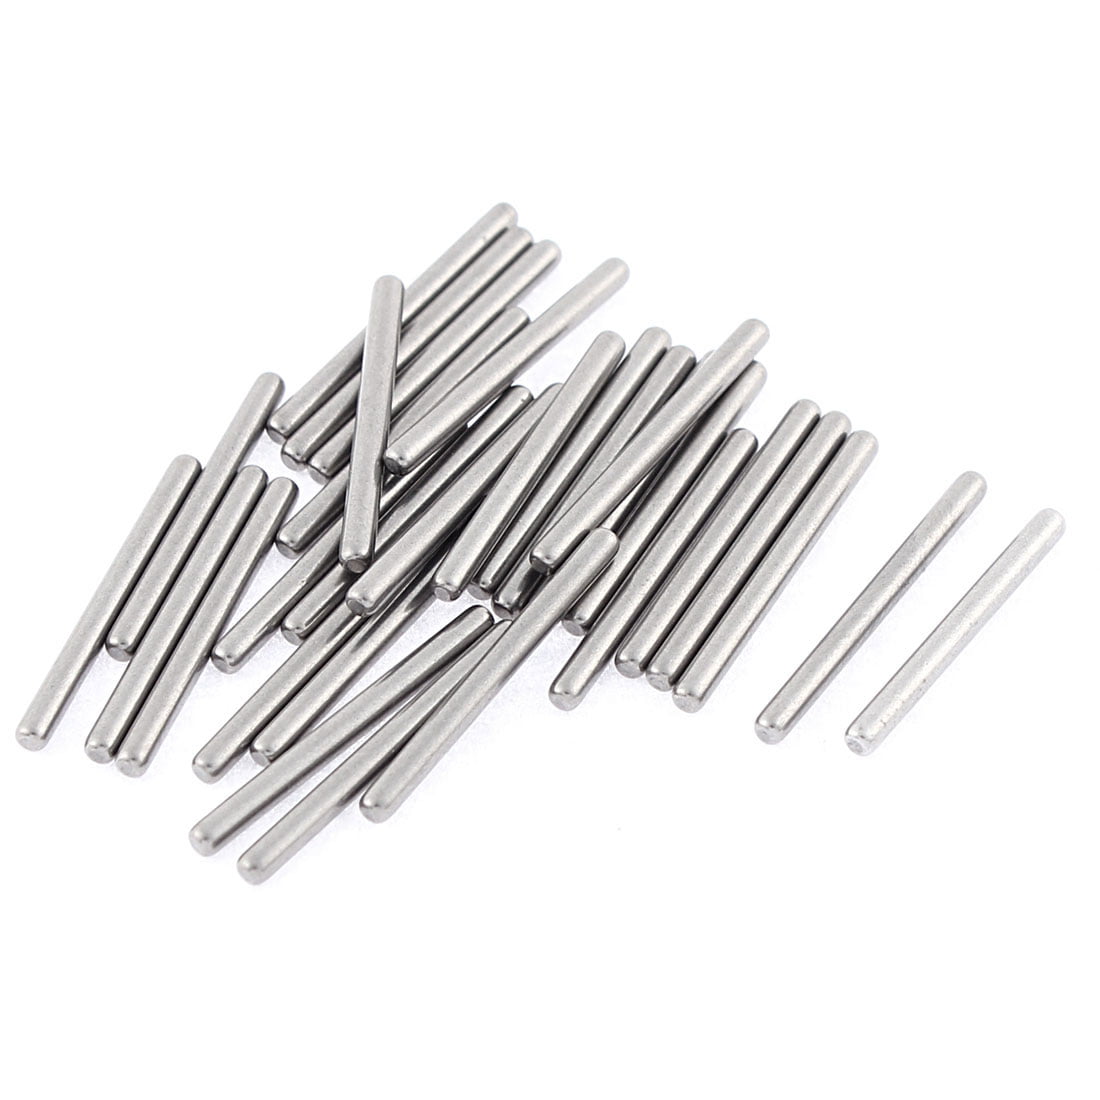 M2x22mm Stainless Steel Straight Retaining Dowel Pins Rod Fasten Elements 30 Pcs 